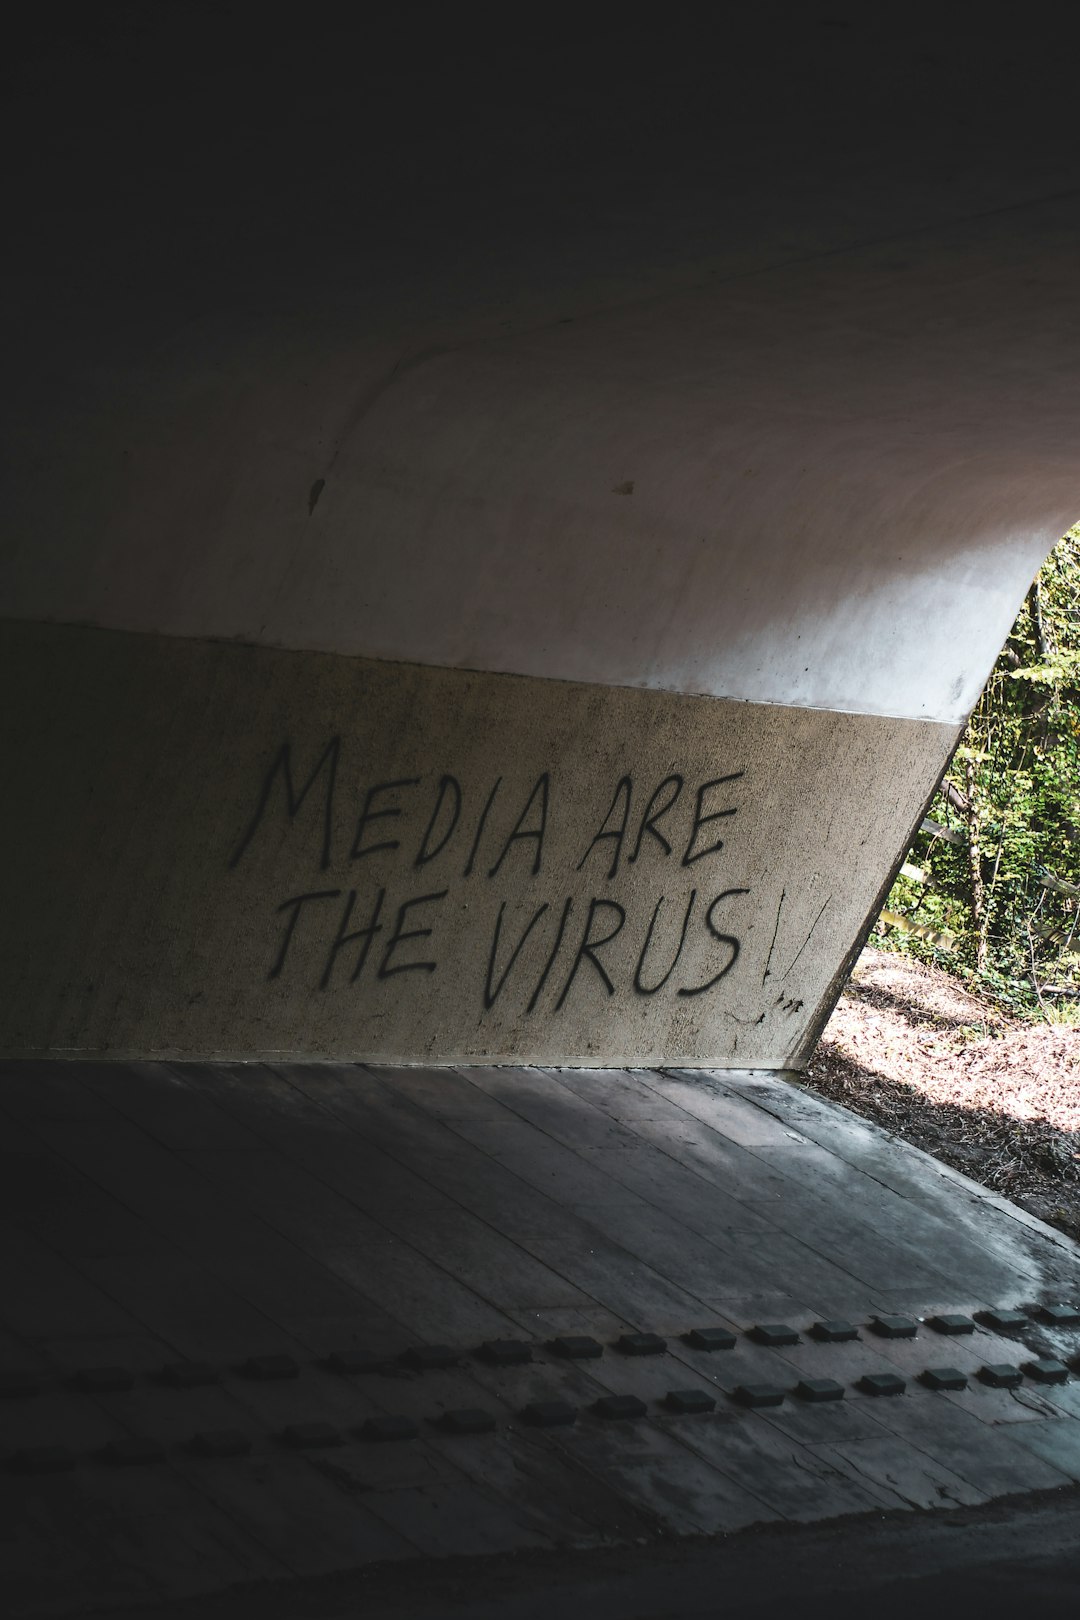 The Media is the Virus 